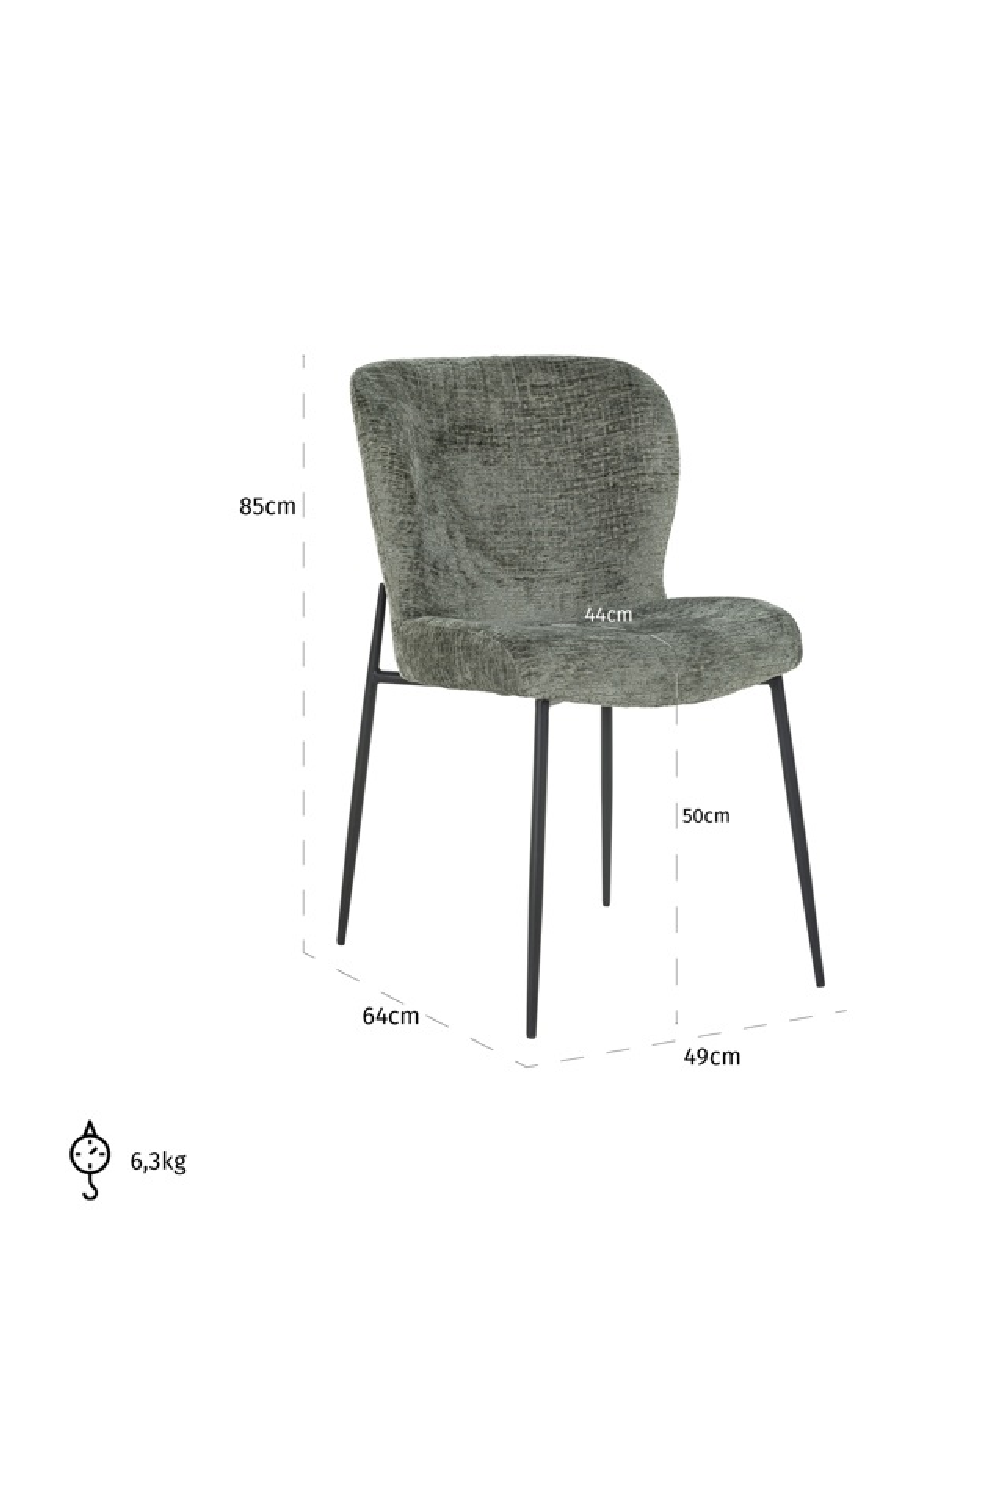 Upholstered Minimalist Dining Chair | OROA Darby | Oroa.com